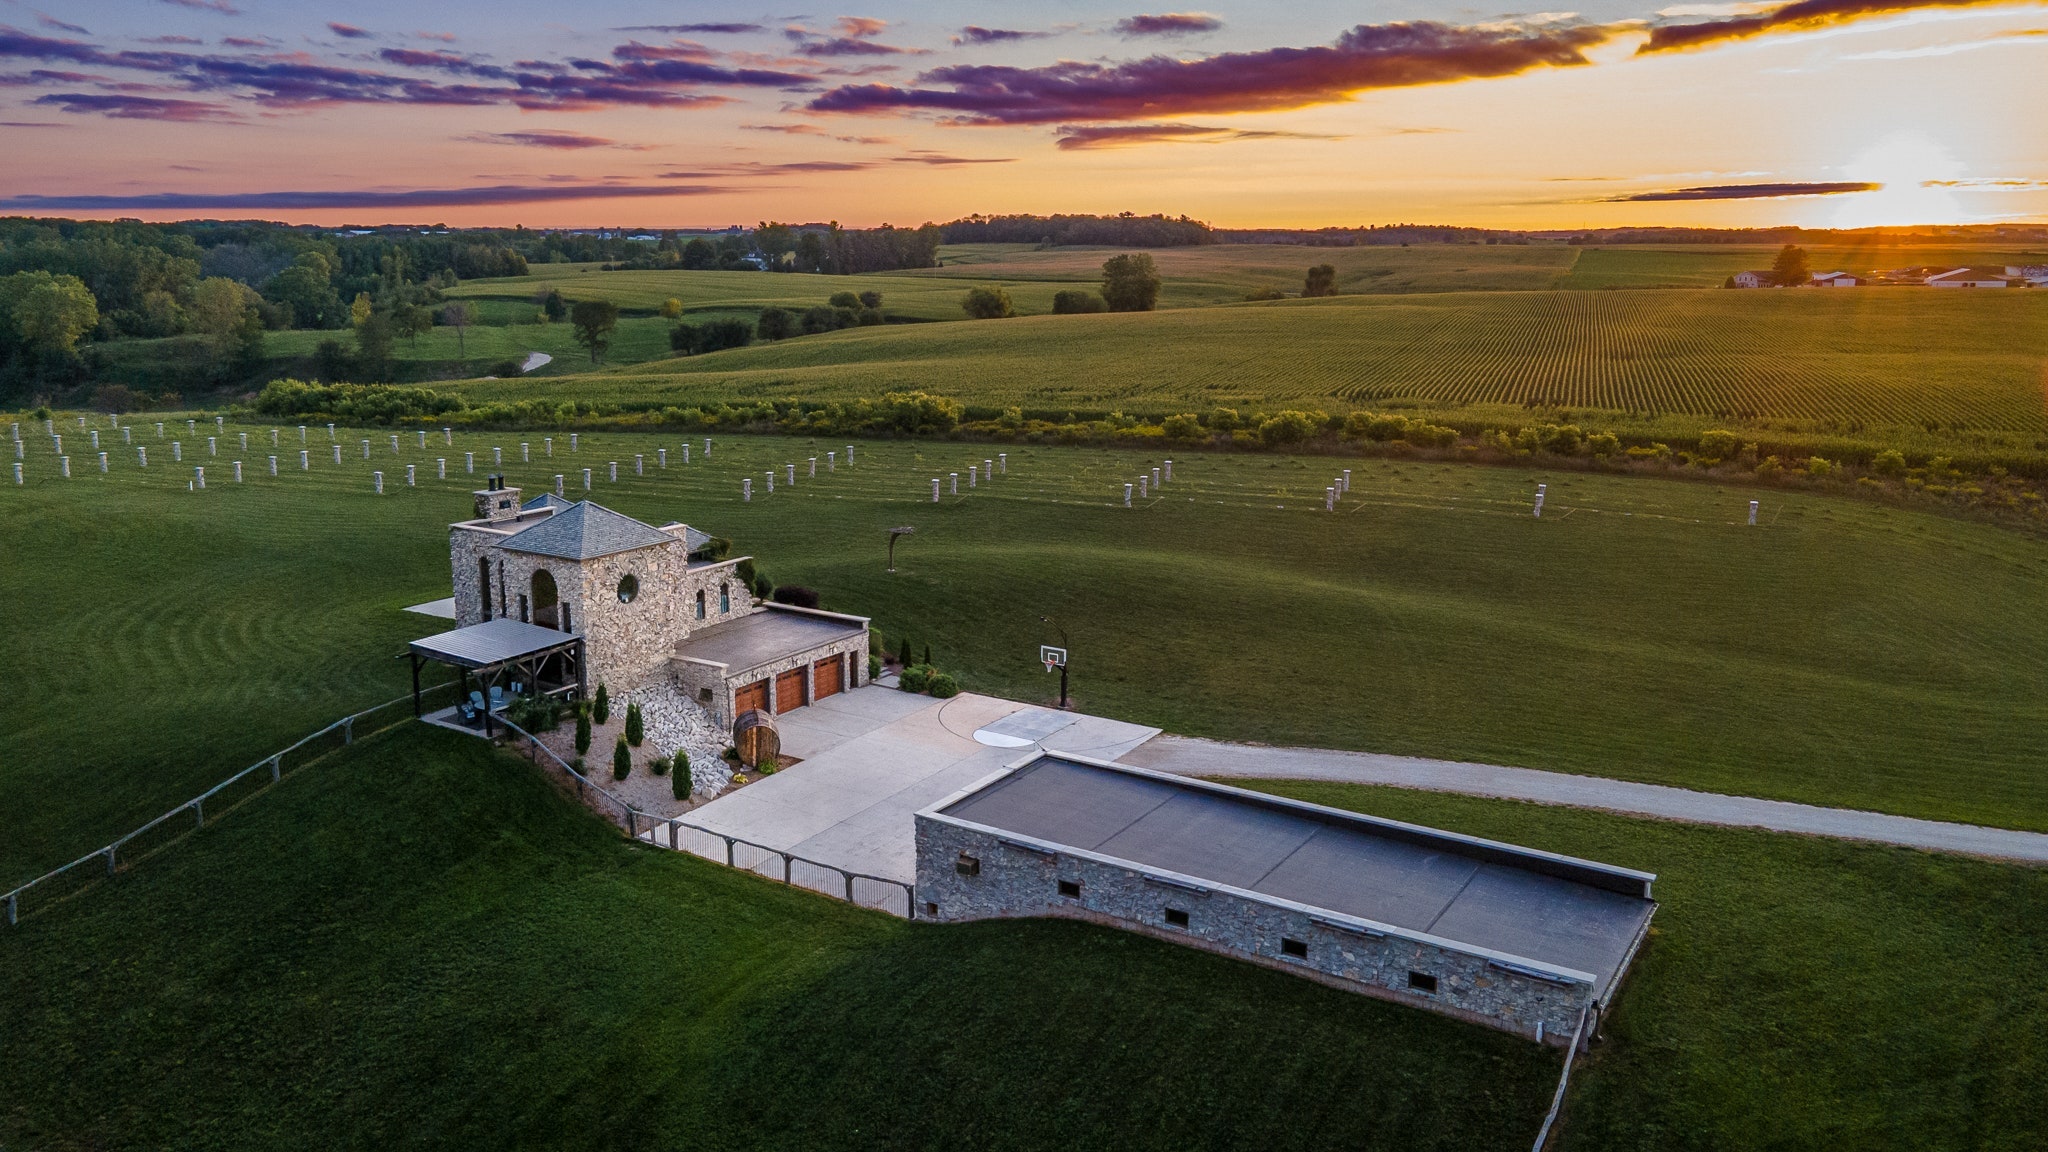 9 Winery Airbnb Rentals Across the US You Don't Want to Miss